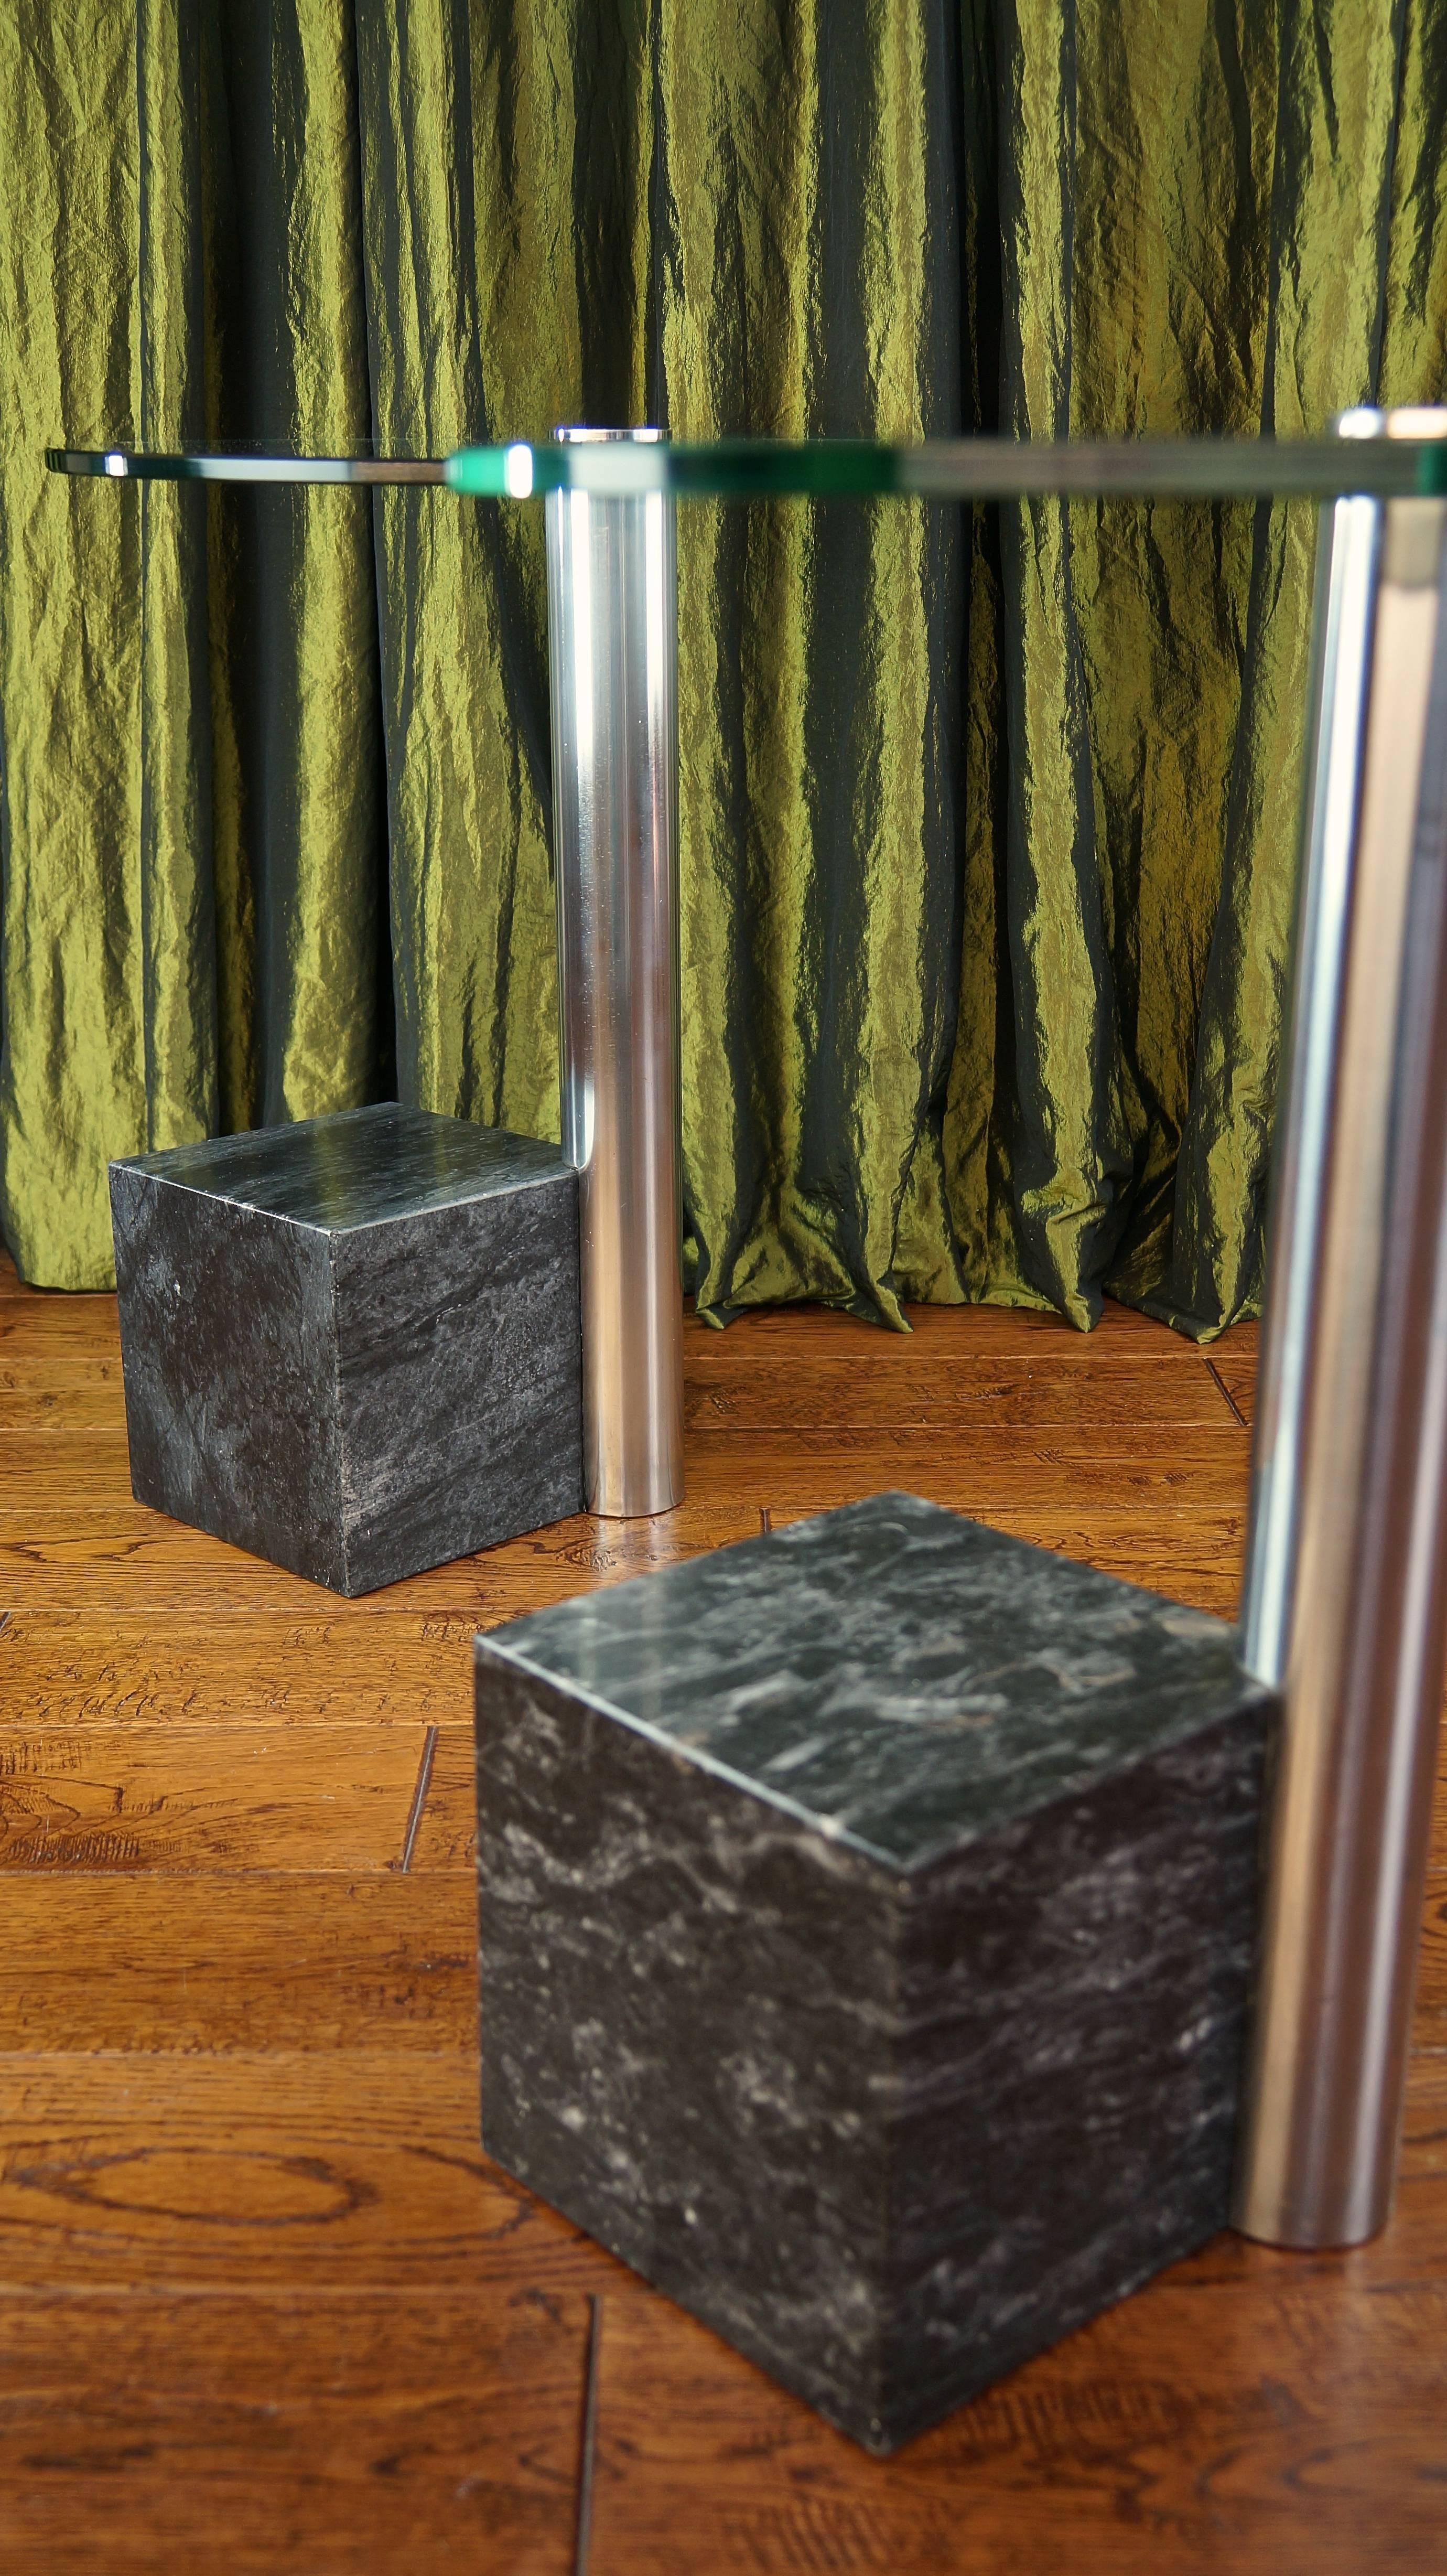 Pair of Vintage Marble and Glass HK2 Side Tables by Hank Kwint, Metaform 1980s For Sale 6